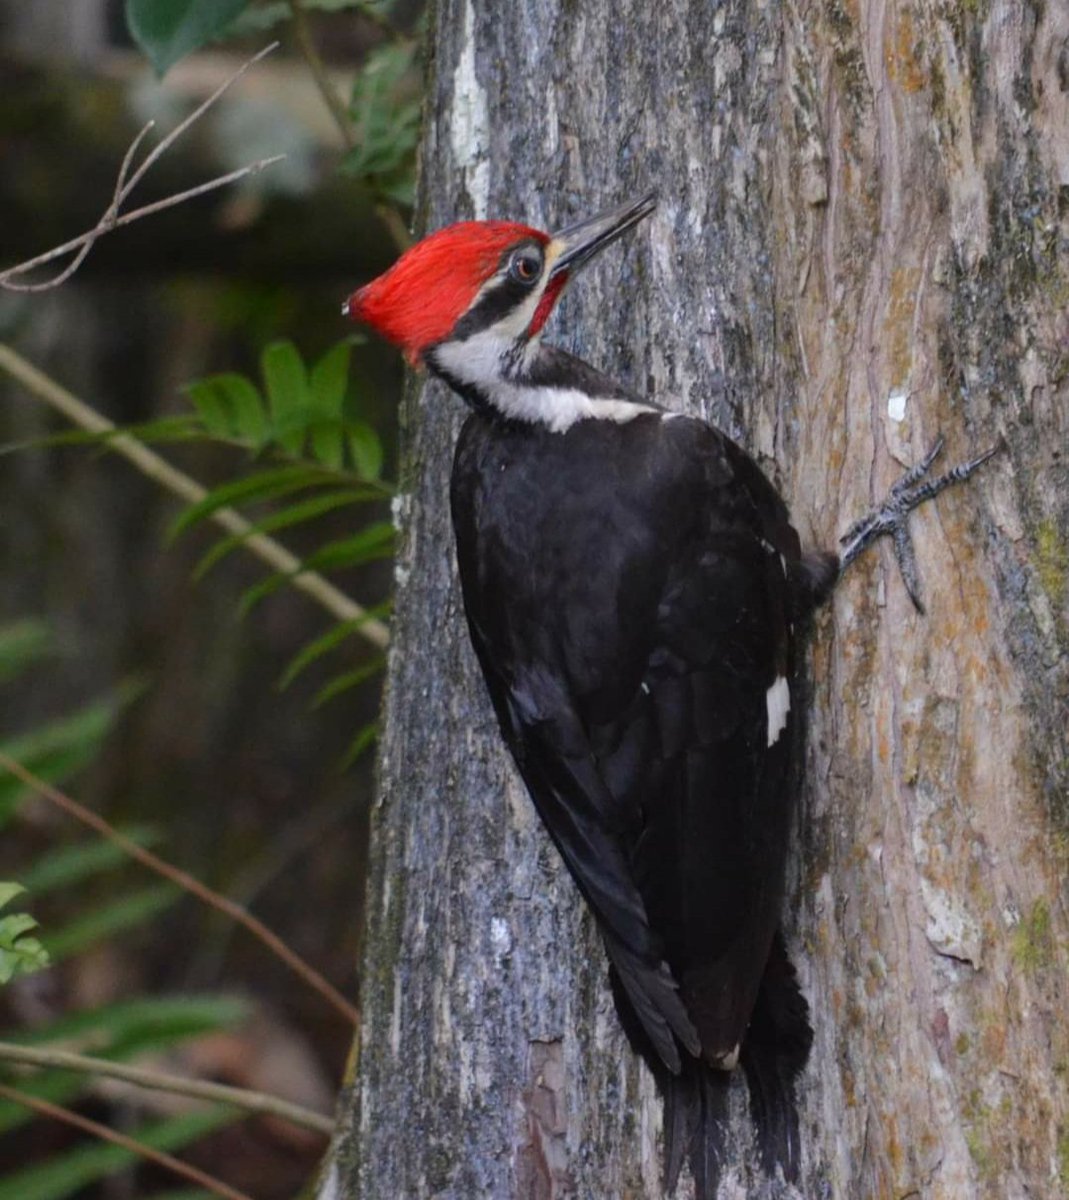 Pileated Woodpeckers in the yard today and most days ❤🖤🤍
#pileatedwoodpecker #floridabirds #floridawildlife #birds #swfl #woodpecker #nature #florida